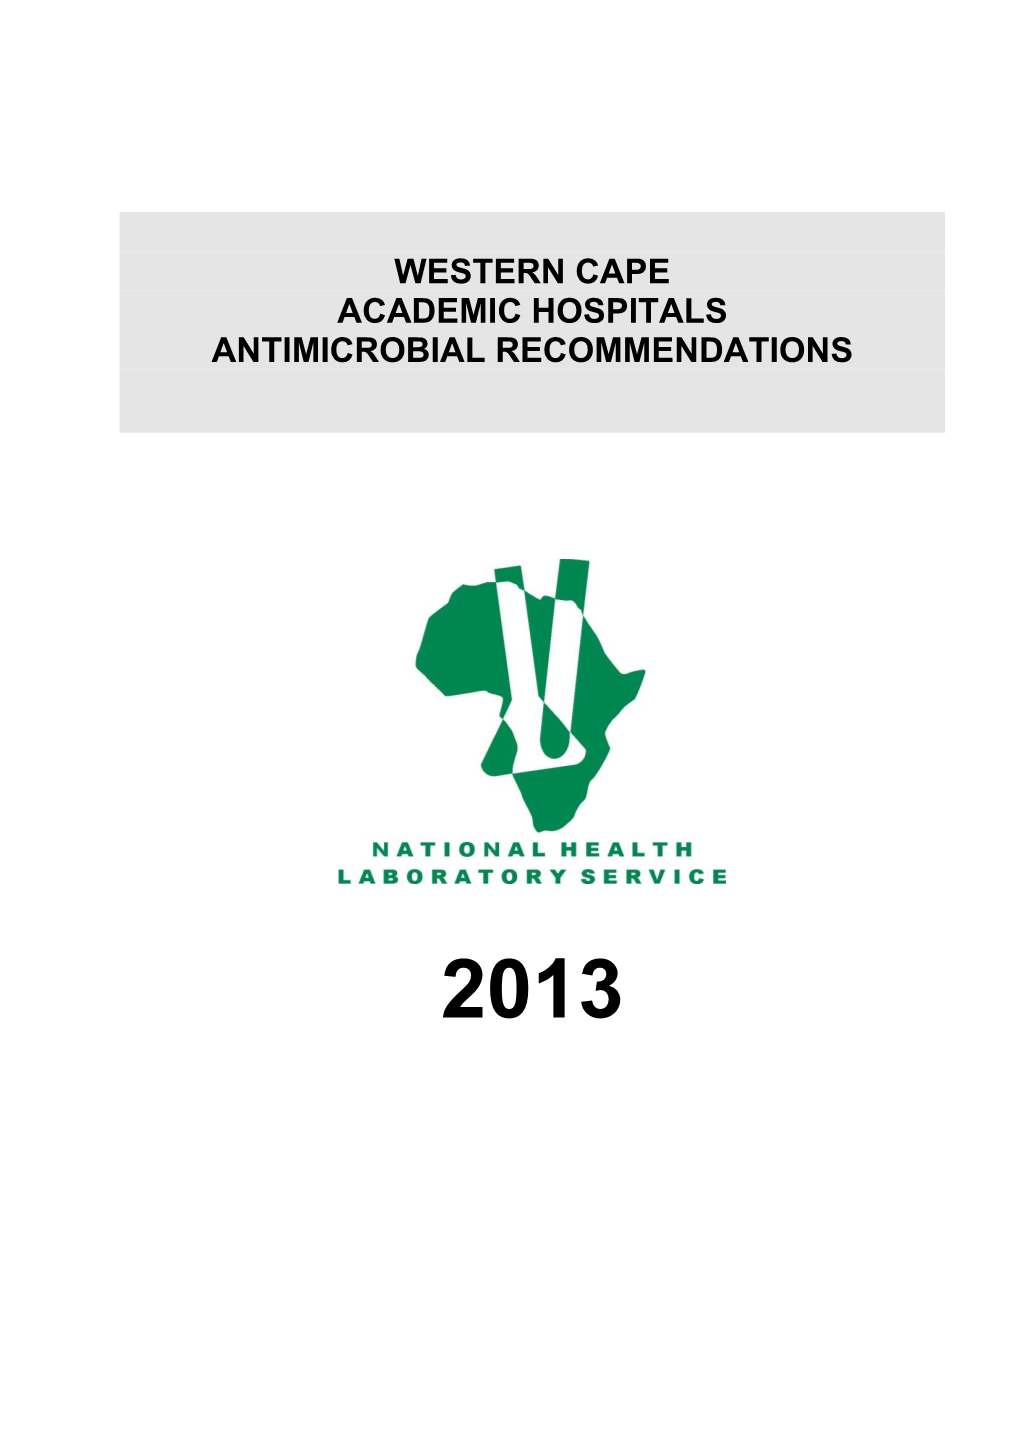 Western Cape Academic Hospitals Antimicrobial Recommendations